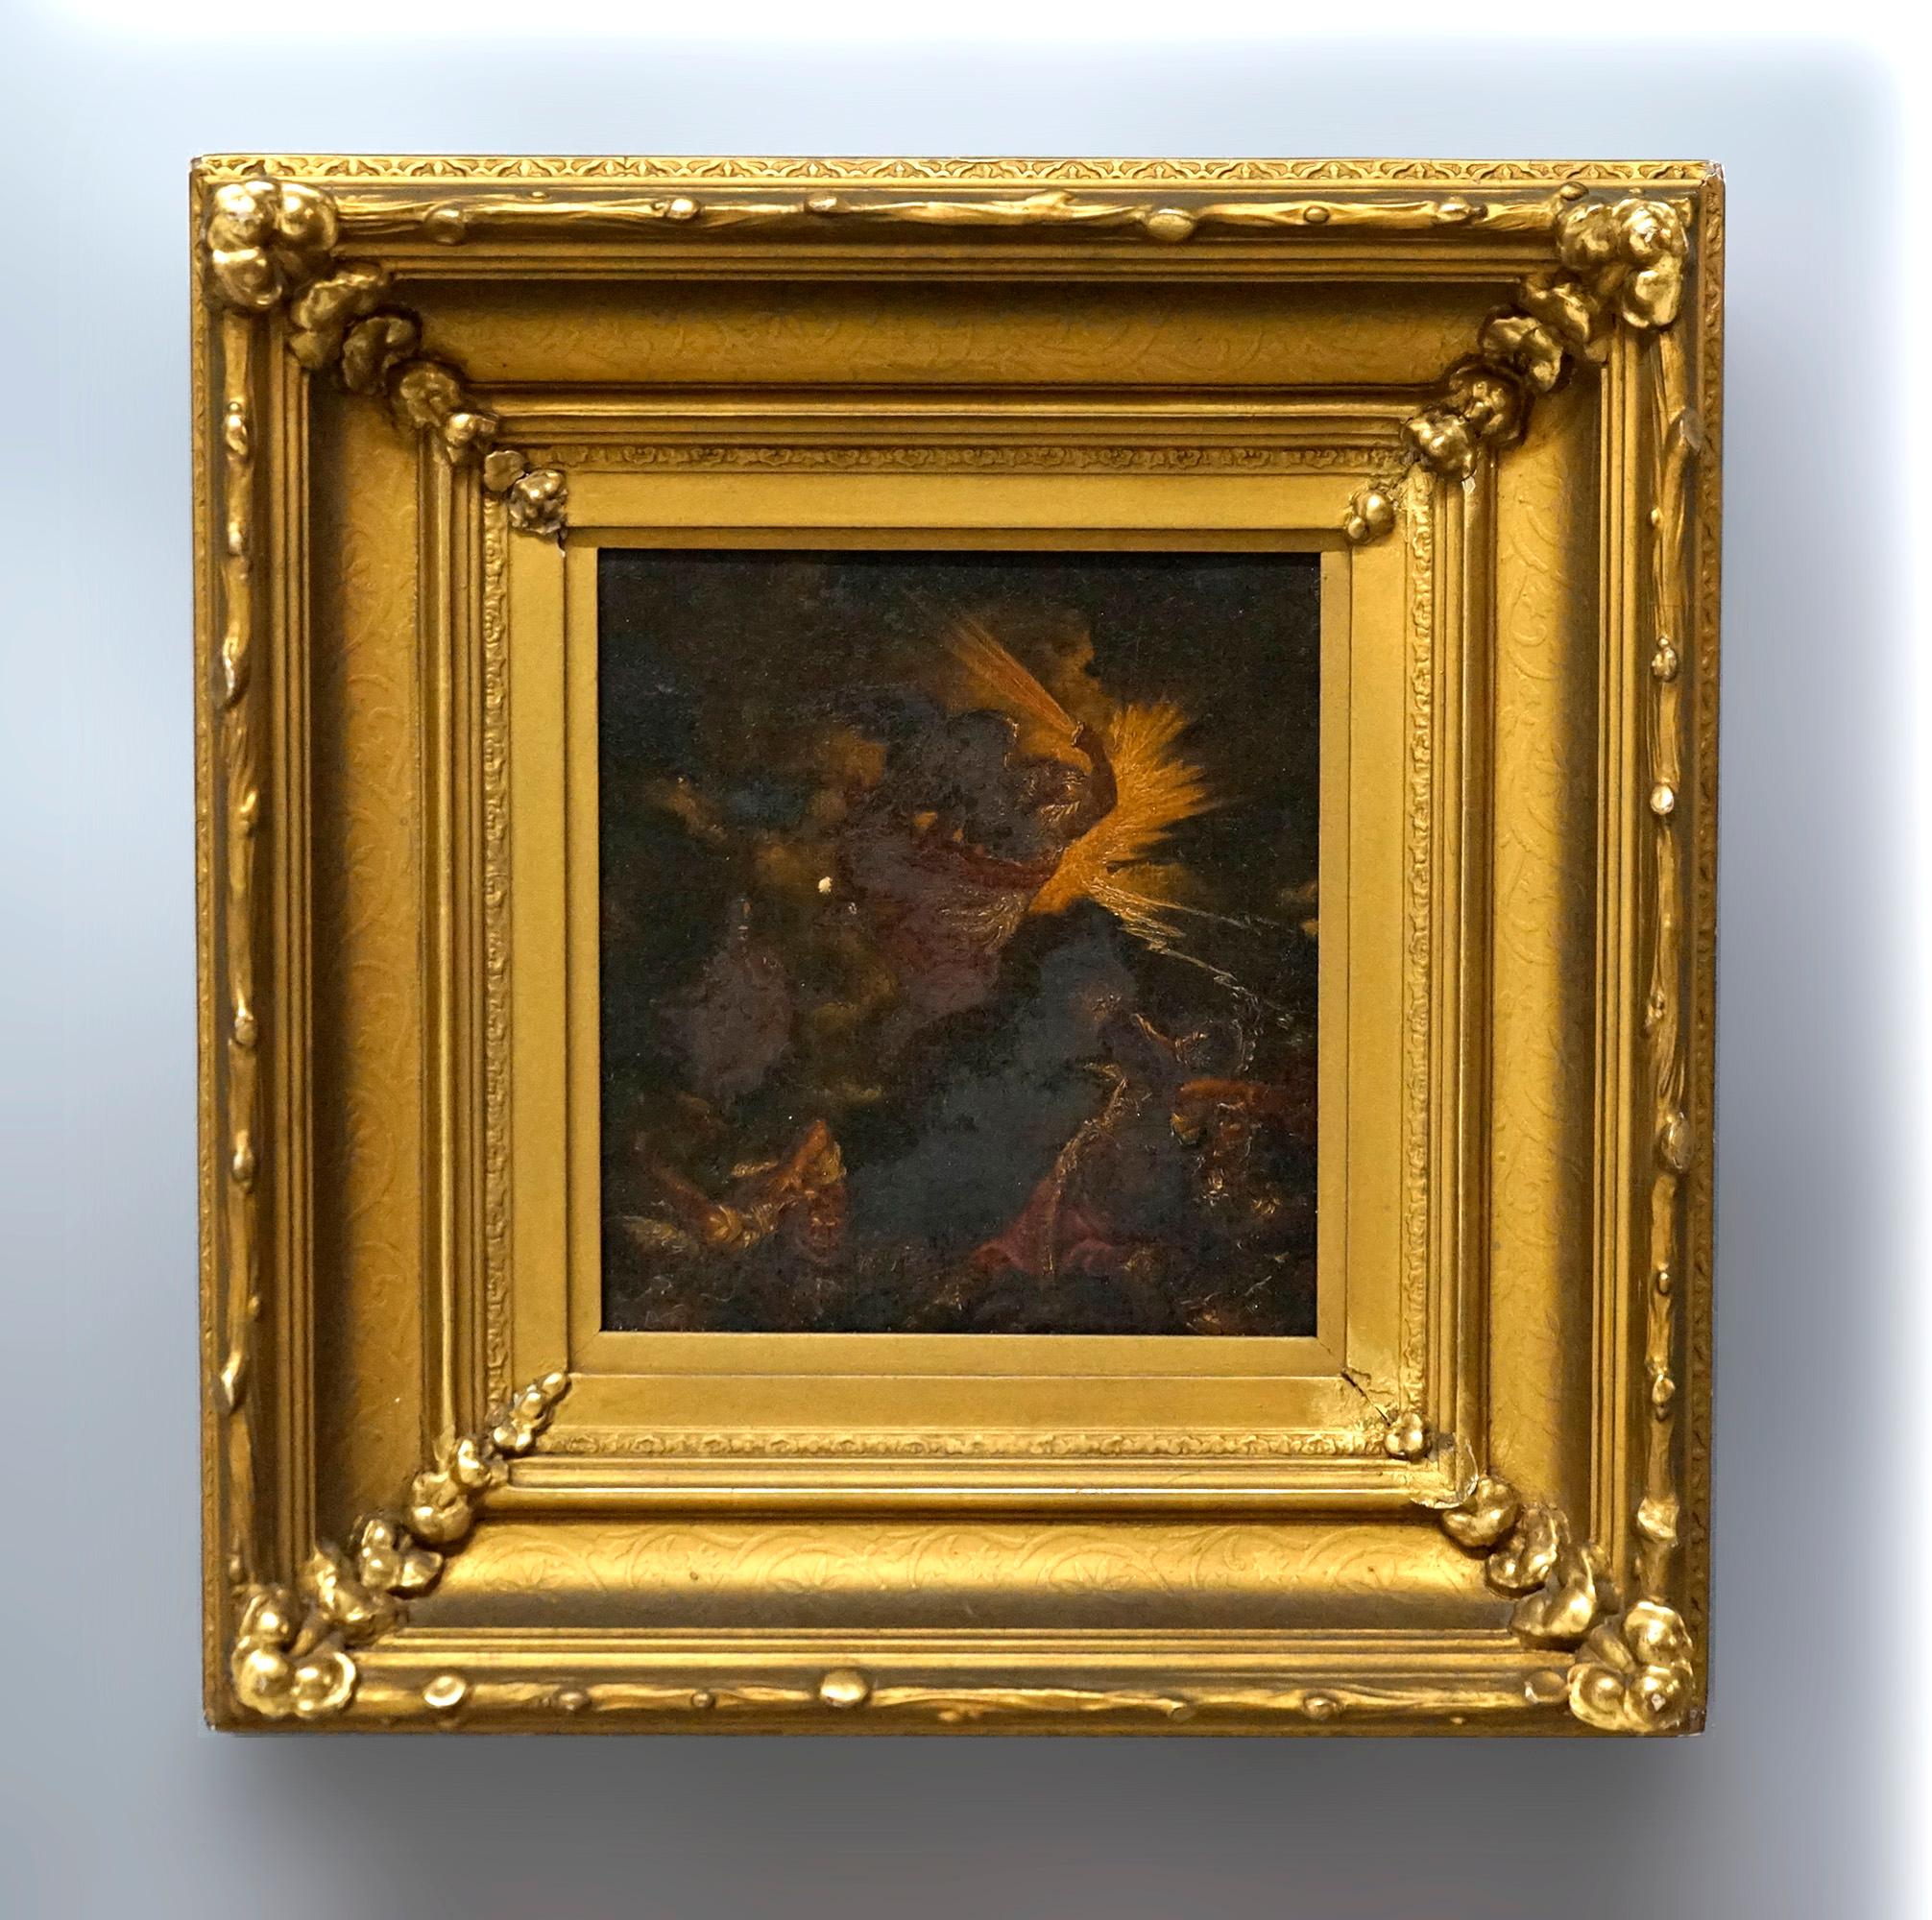 An antique old master painting offers oil on canvas depiction of The Ascension of Jesus Christ, seated in giltwood frame, 19th century

Measures- 21.5''H x 20.5''W x 5''D.

Catalogue Note: Ask about DISCOUNTED DELIVERY RATES available to most